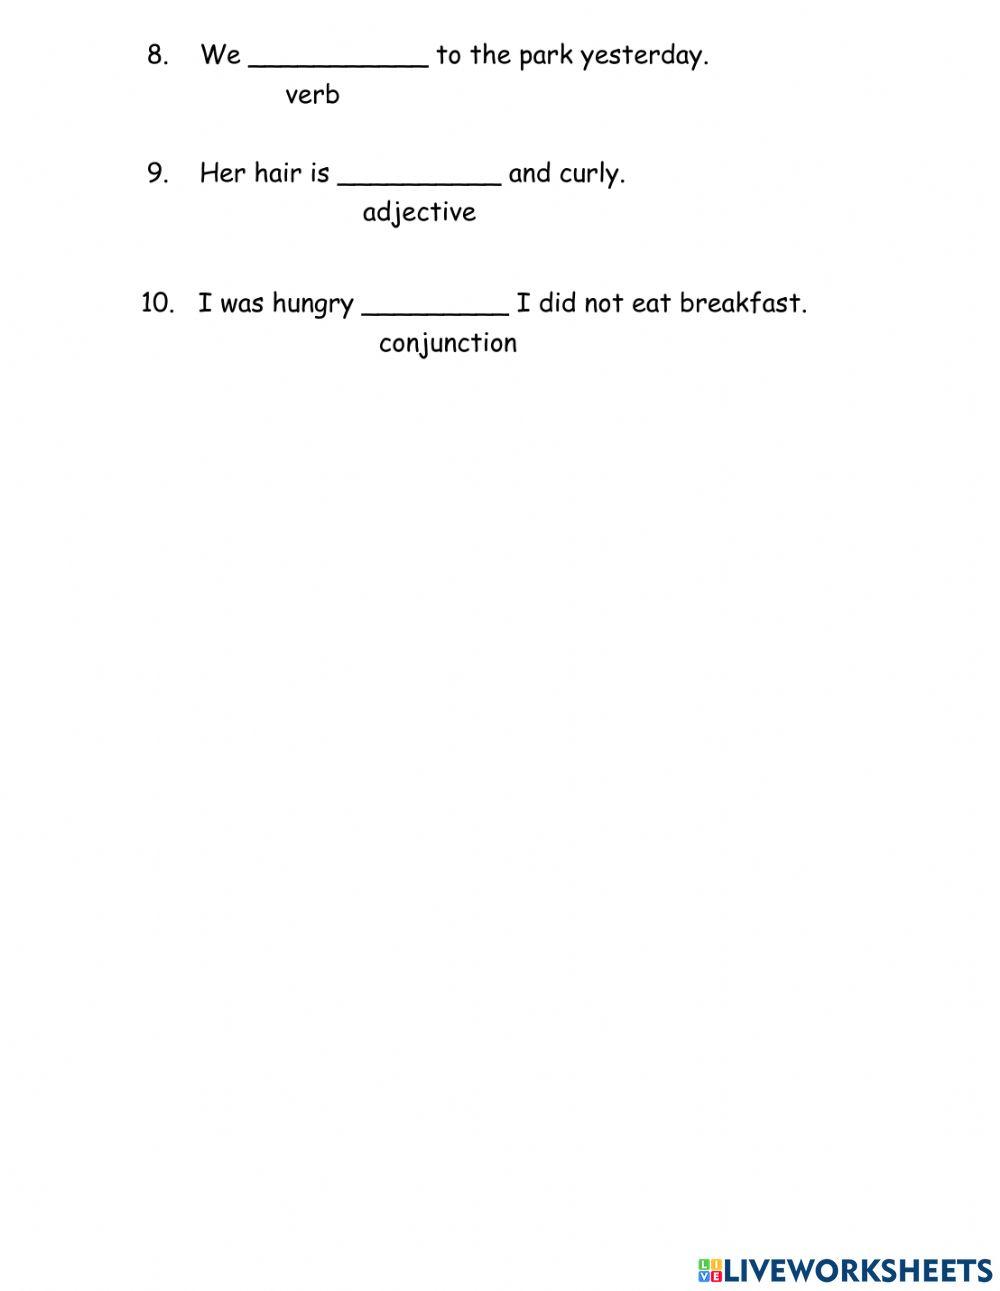 Second worksheet on parts of speech